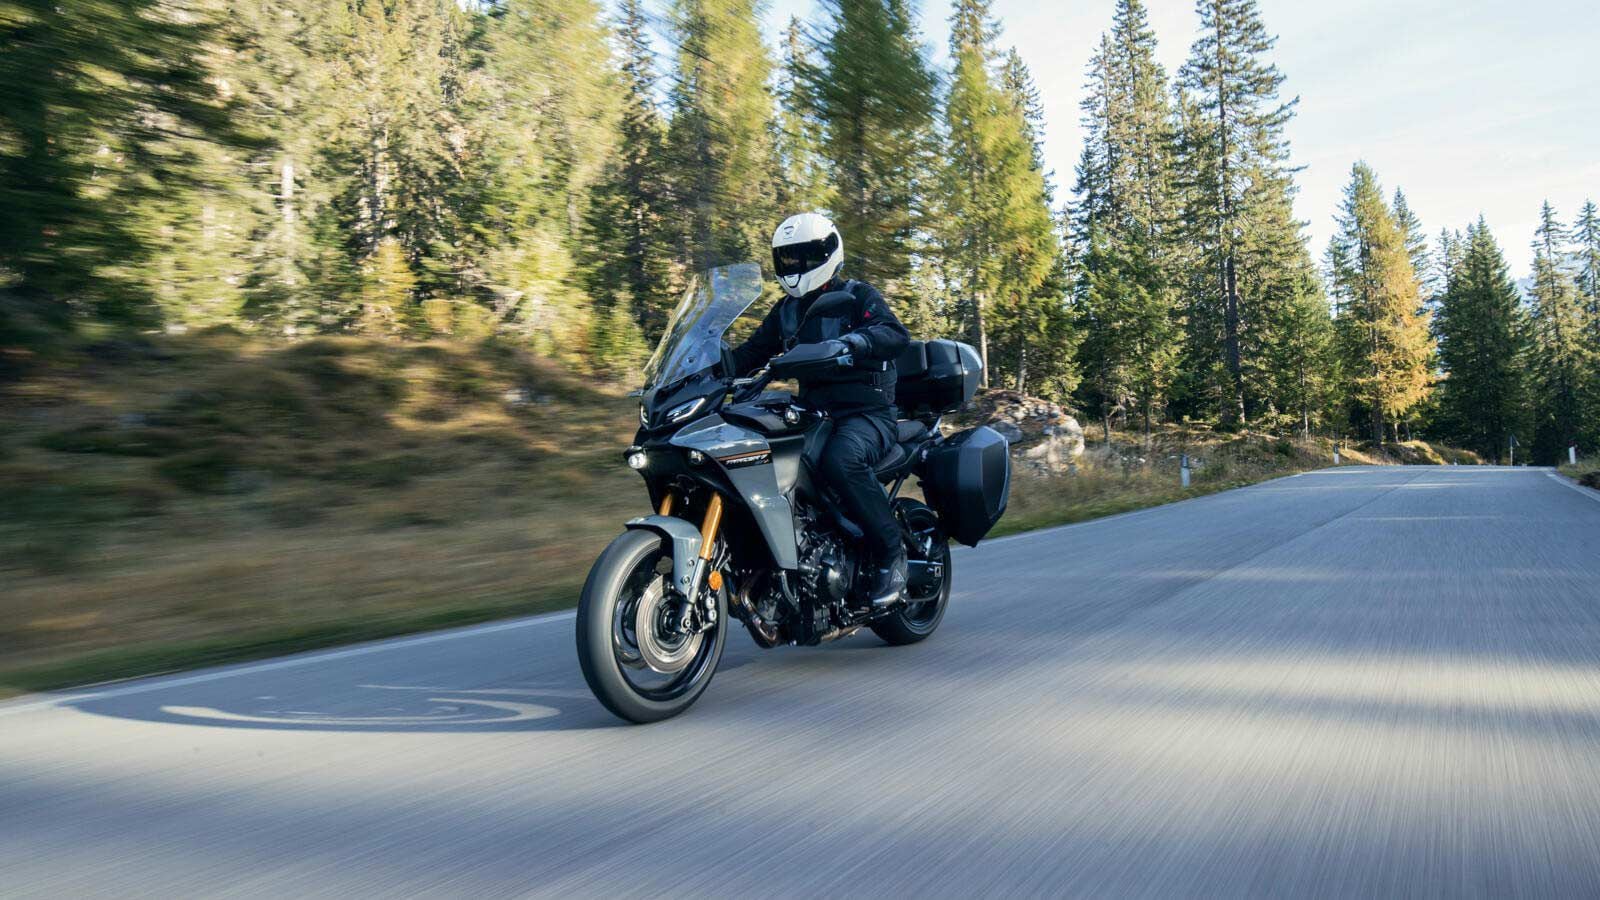 Yamaha’s new tech promise to make the Tracer 9 GT+ a safer machine.